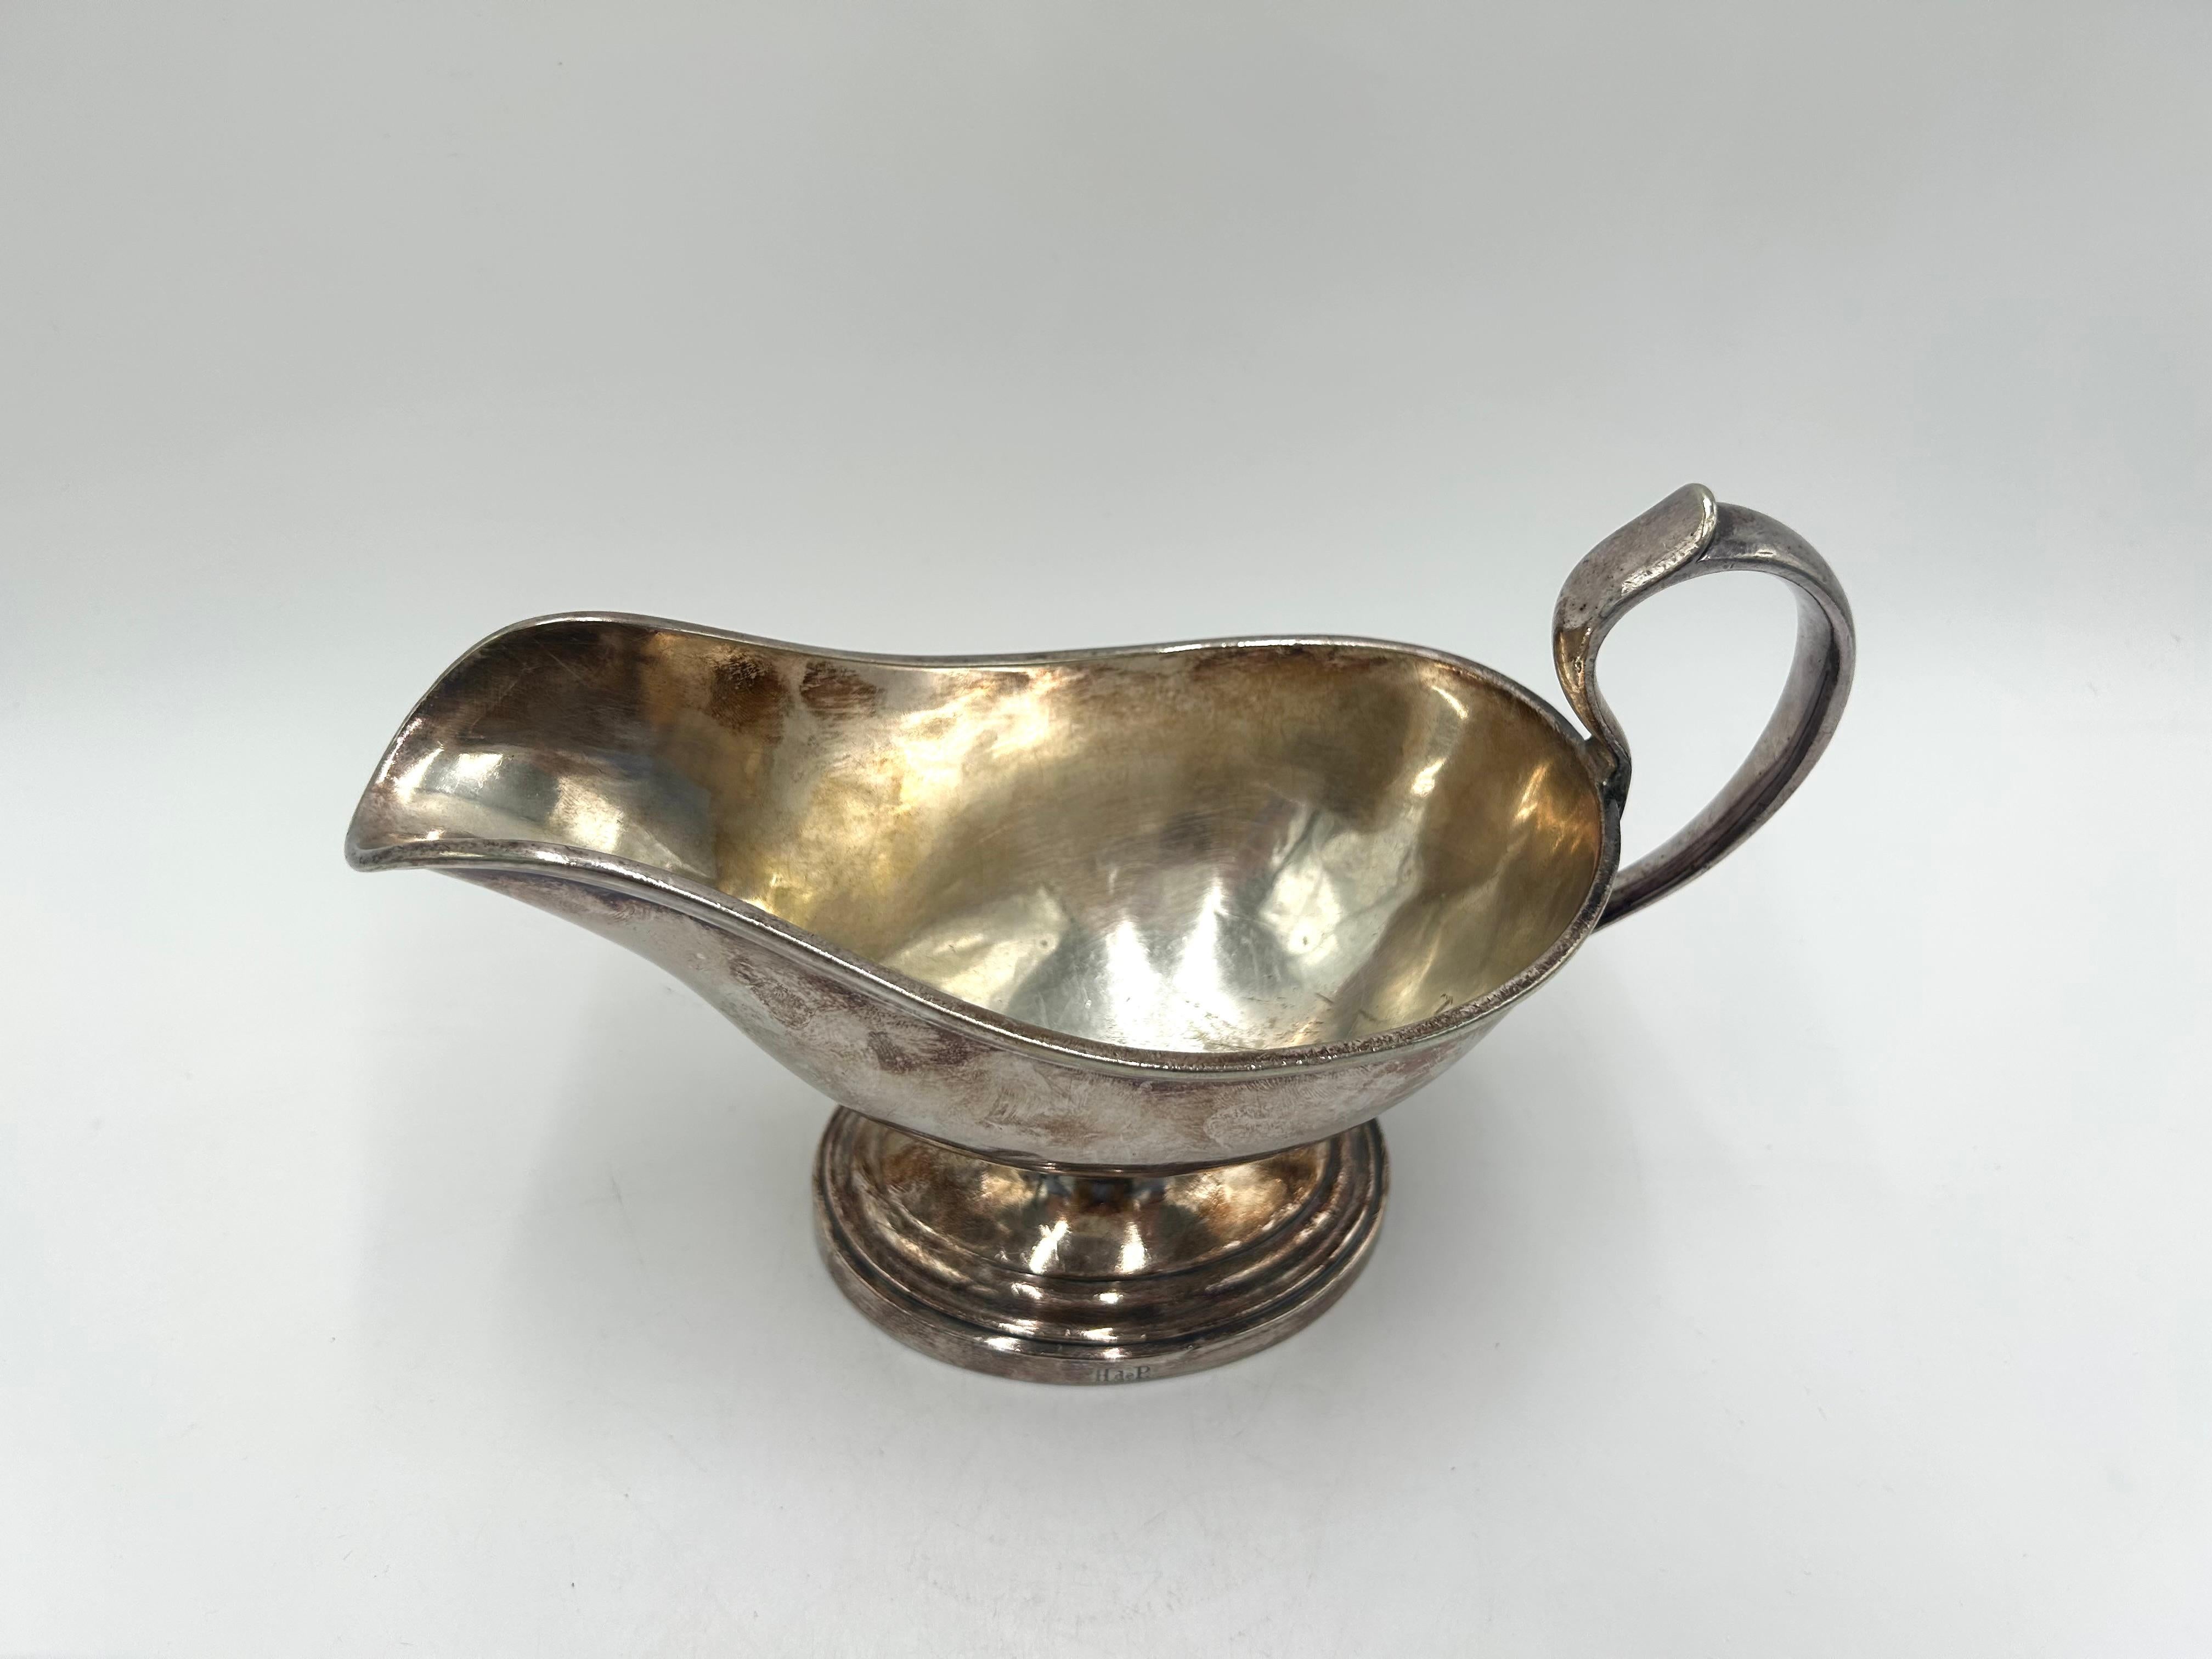 Beautiful silver plated sauce boat

The only signature based on HdeP.

Very good condition - covered with patina

height 16cm width 23.5cm depth 11cm